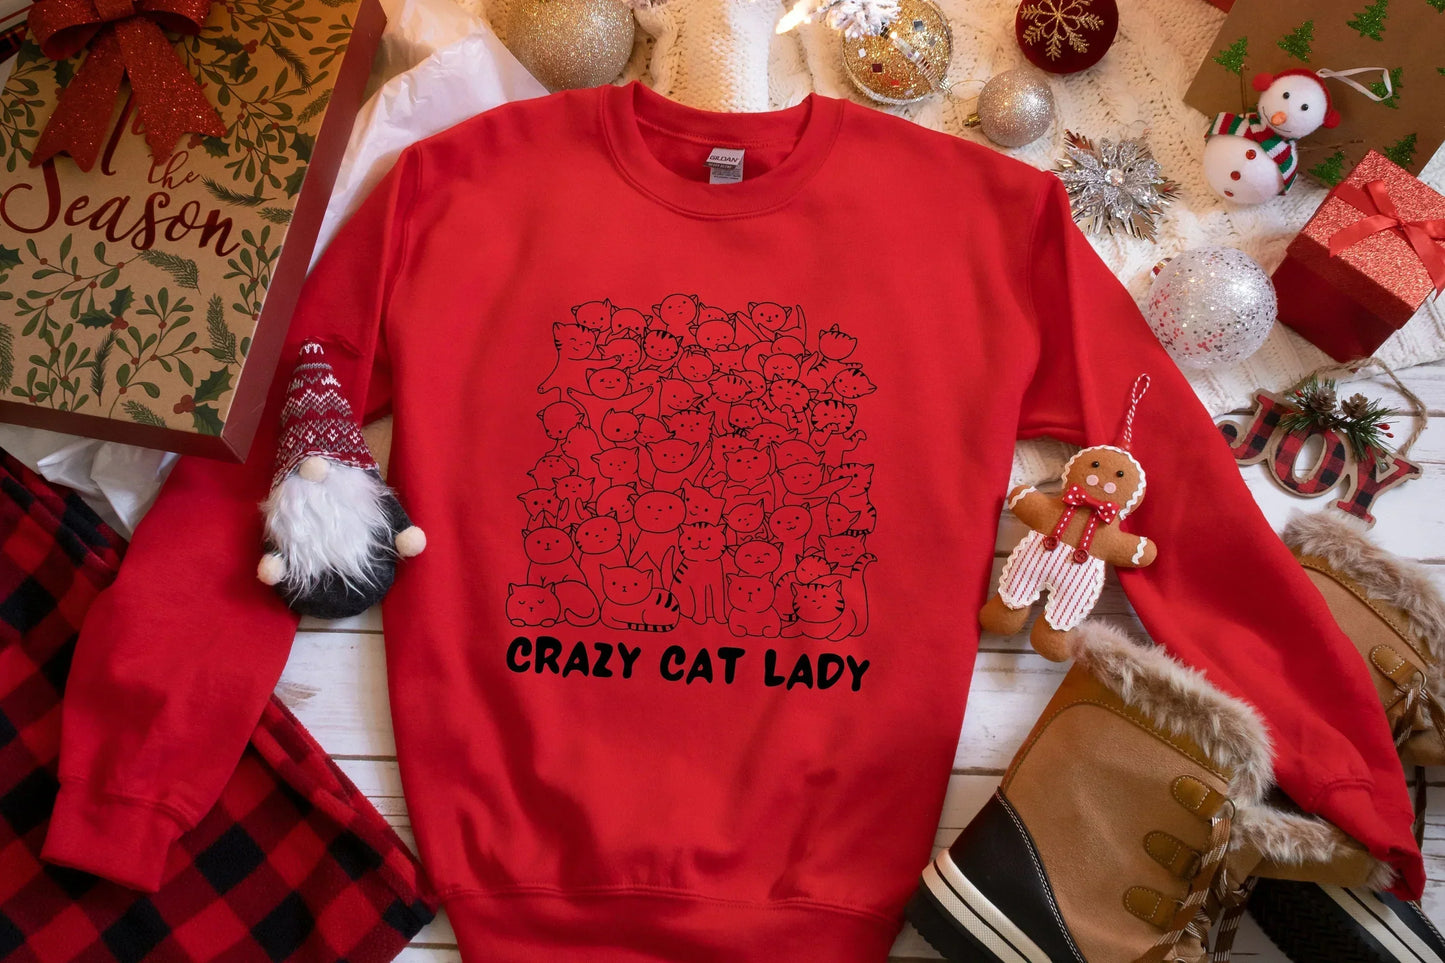 Crazy Cat Lady Shirt, Cat Sweater, Cat Mom Gifts, Gifts for Cat Lovers , Cat tshirt, Cat hoodie, Cat Lover Gifts, Cat Sweatshirt